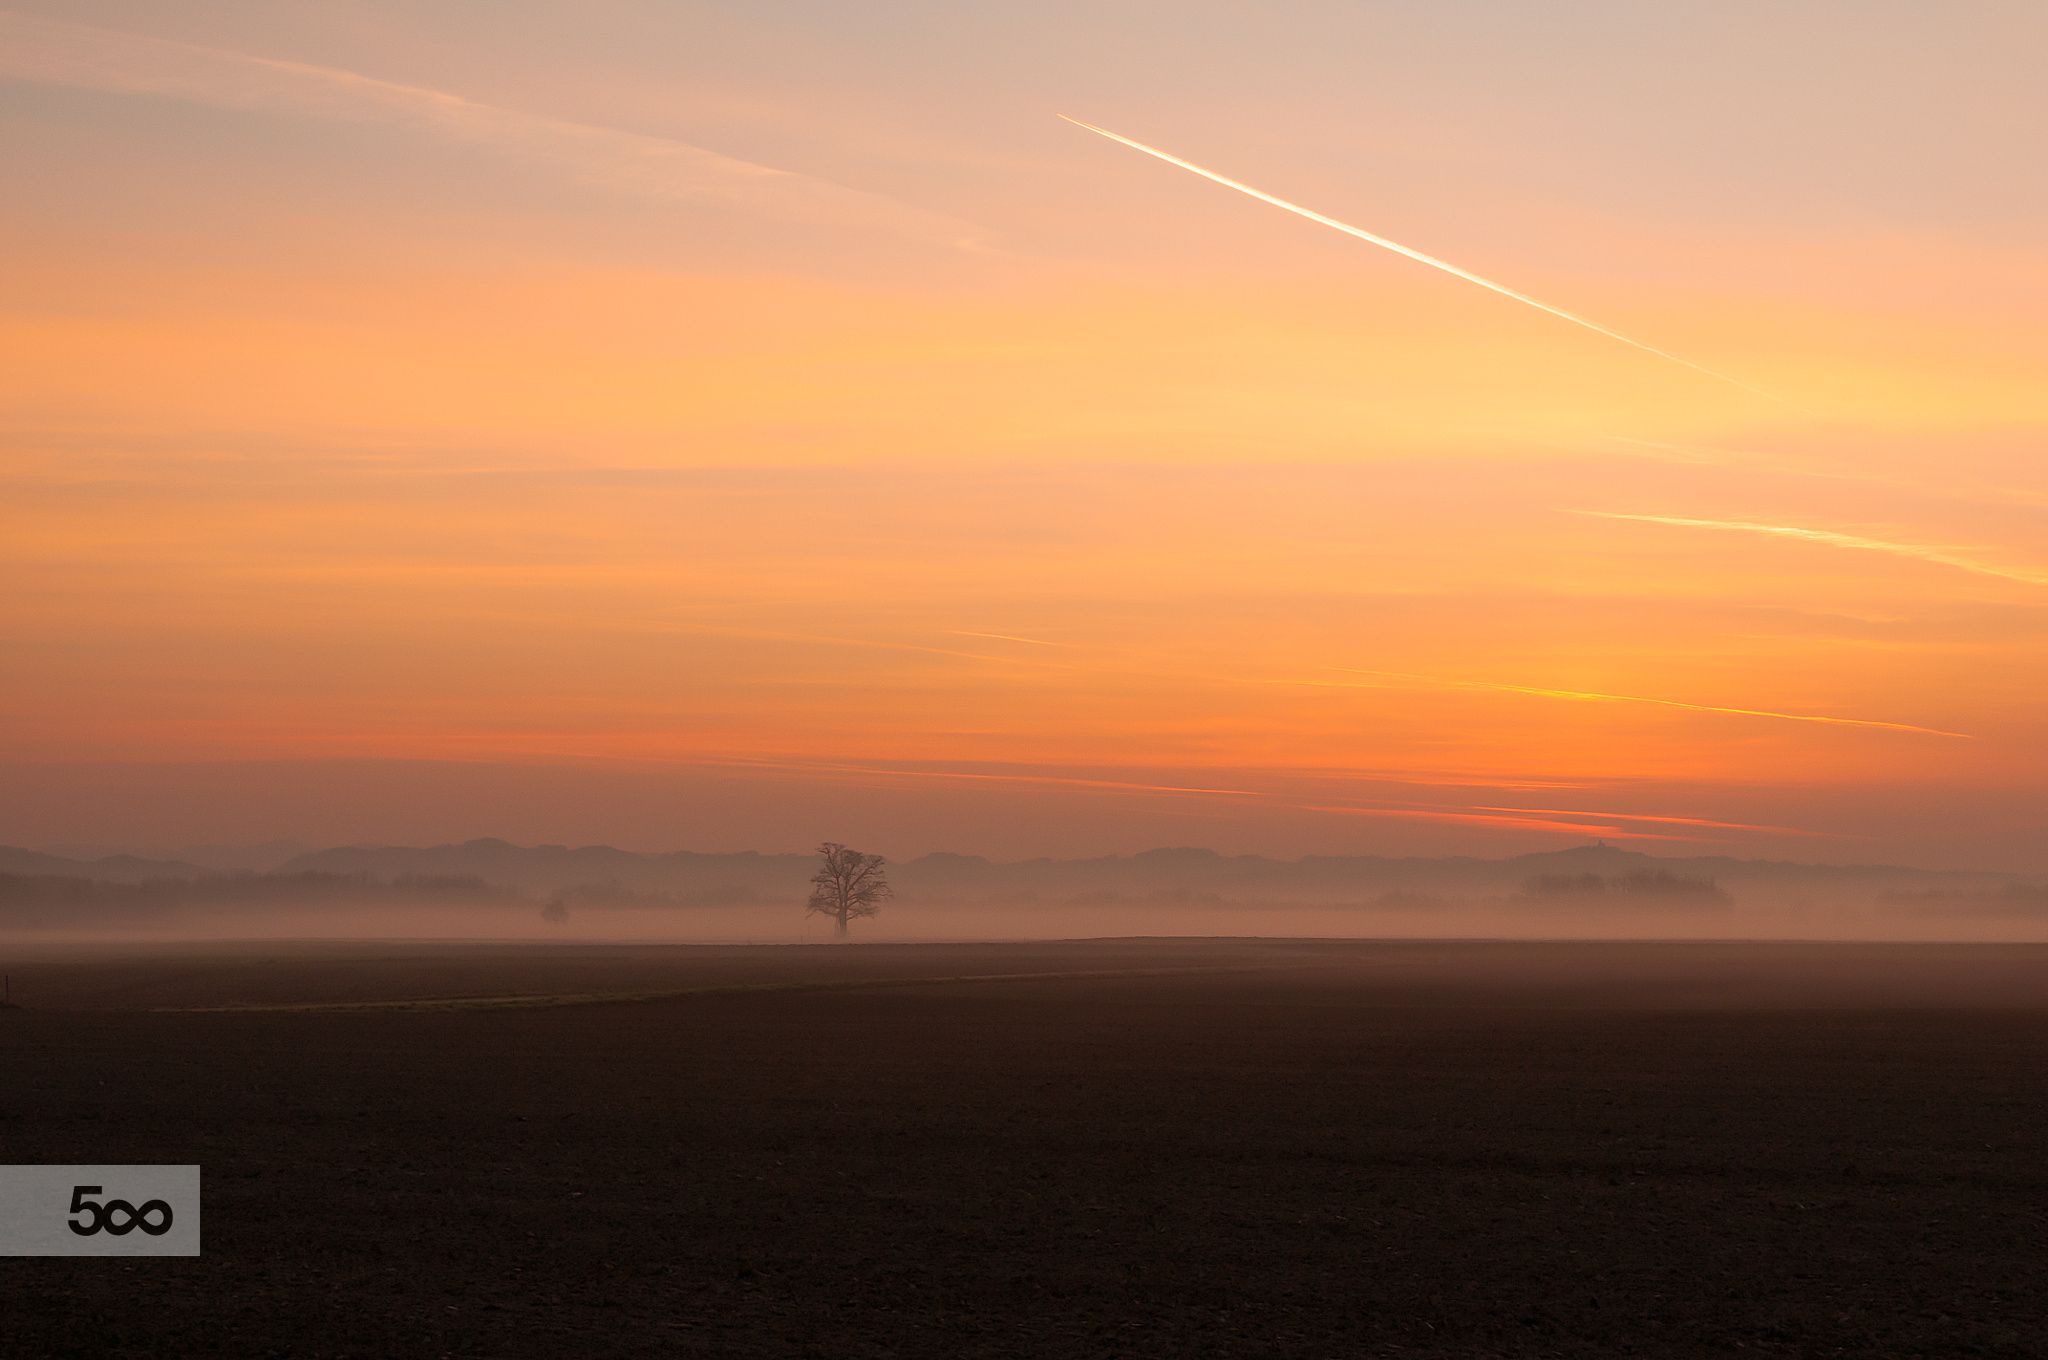 Morgenrot by Leo Pöcksteiner on 500px | nature/ природа | Pinterest ...